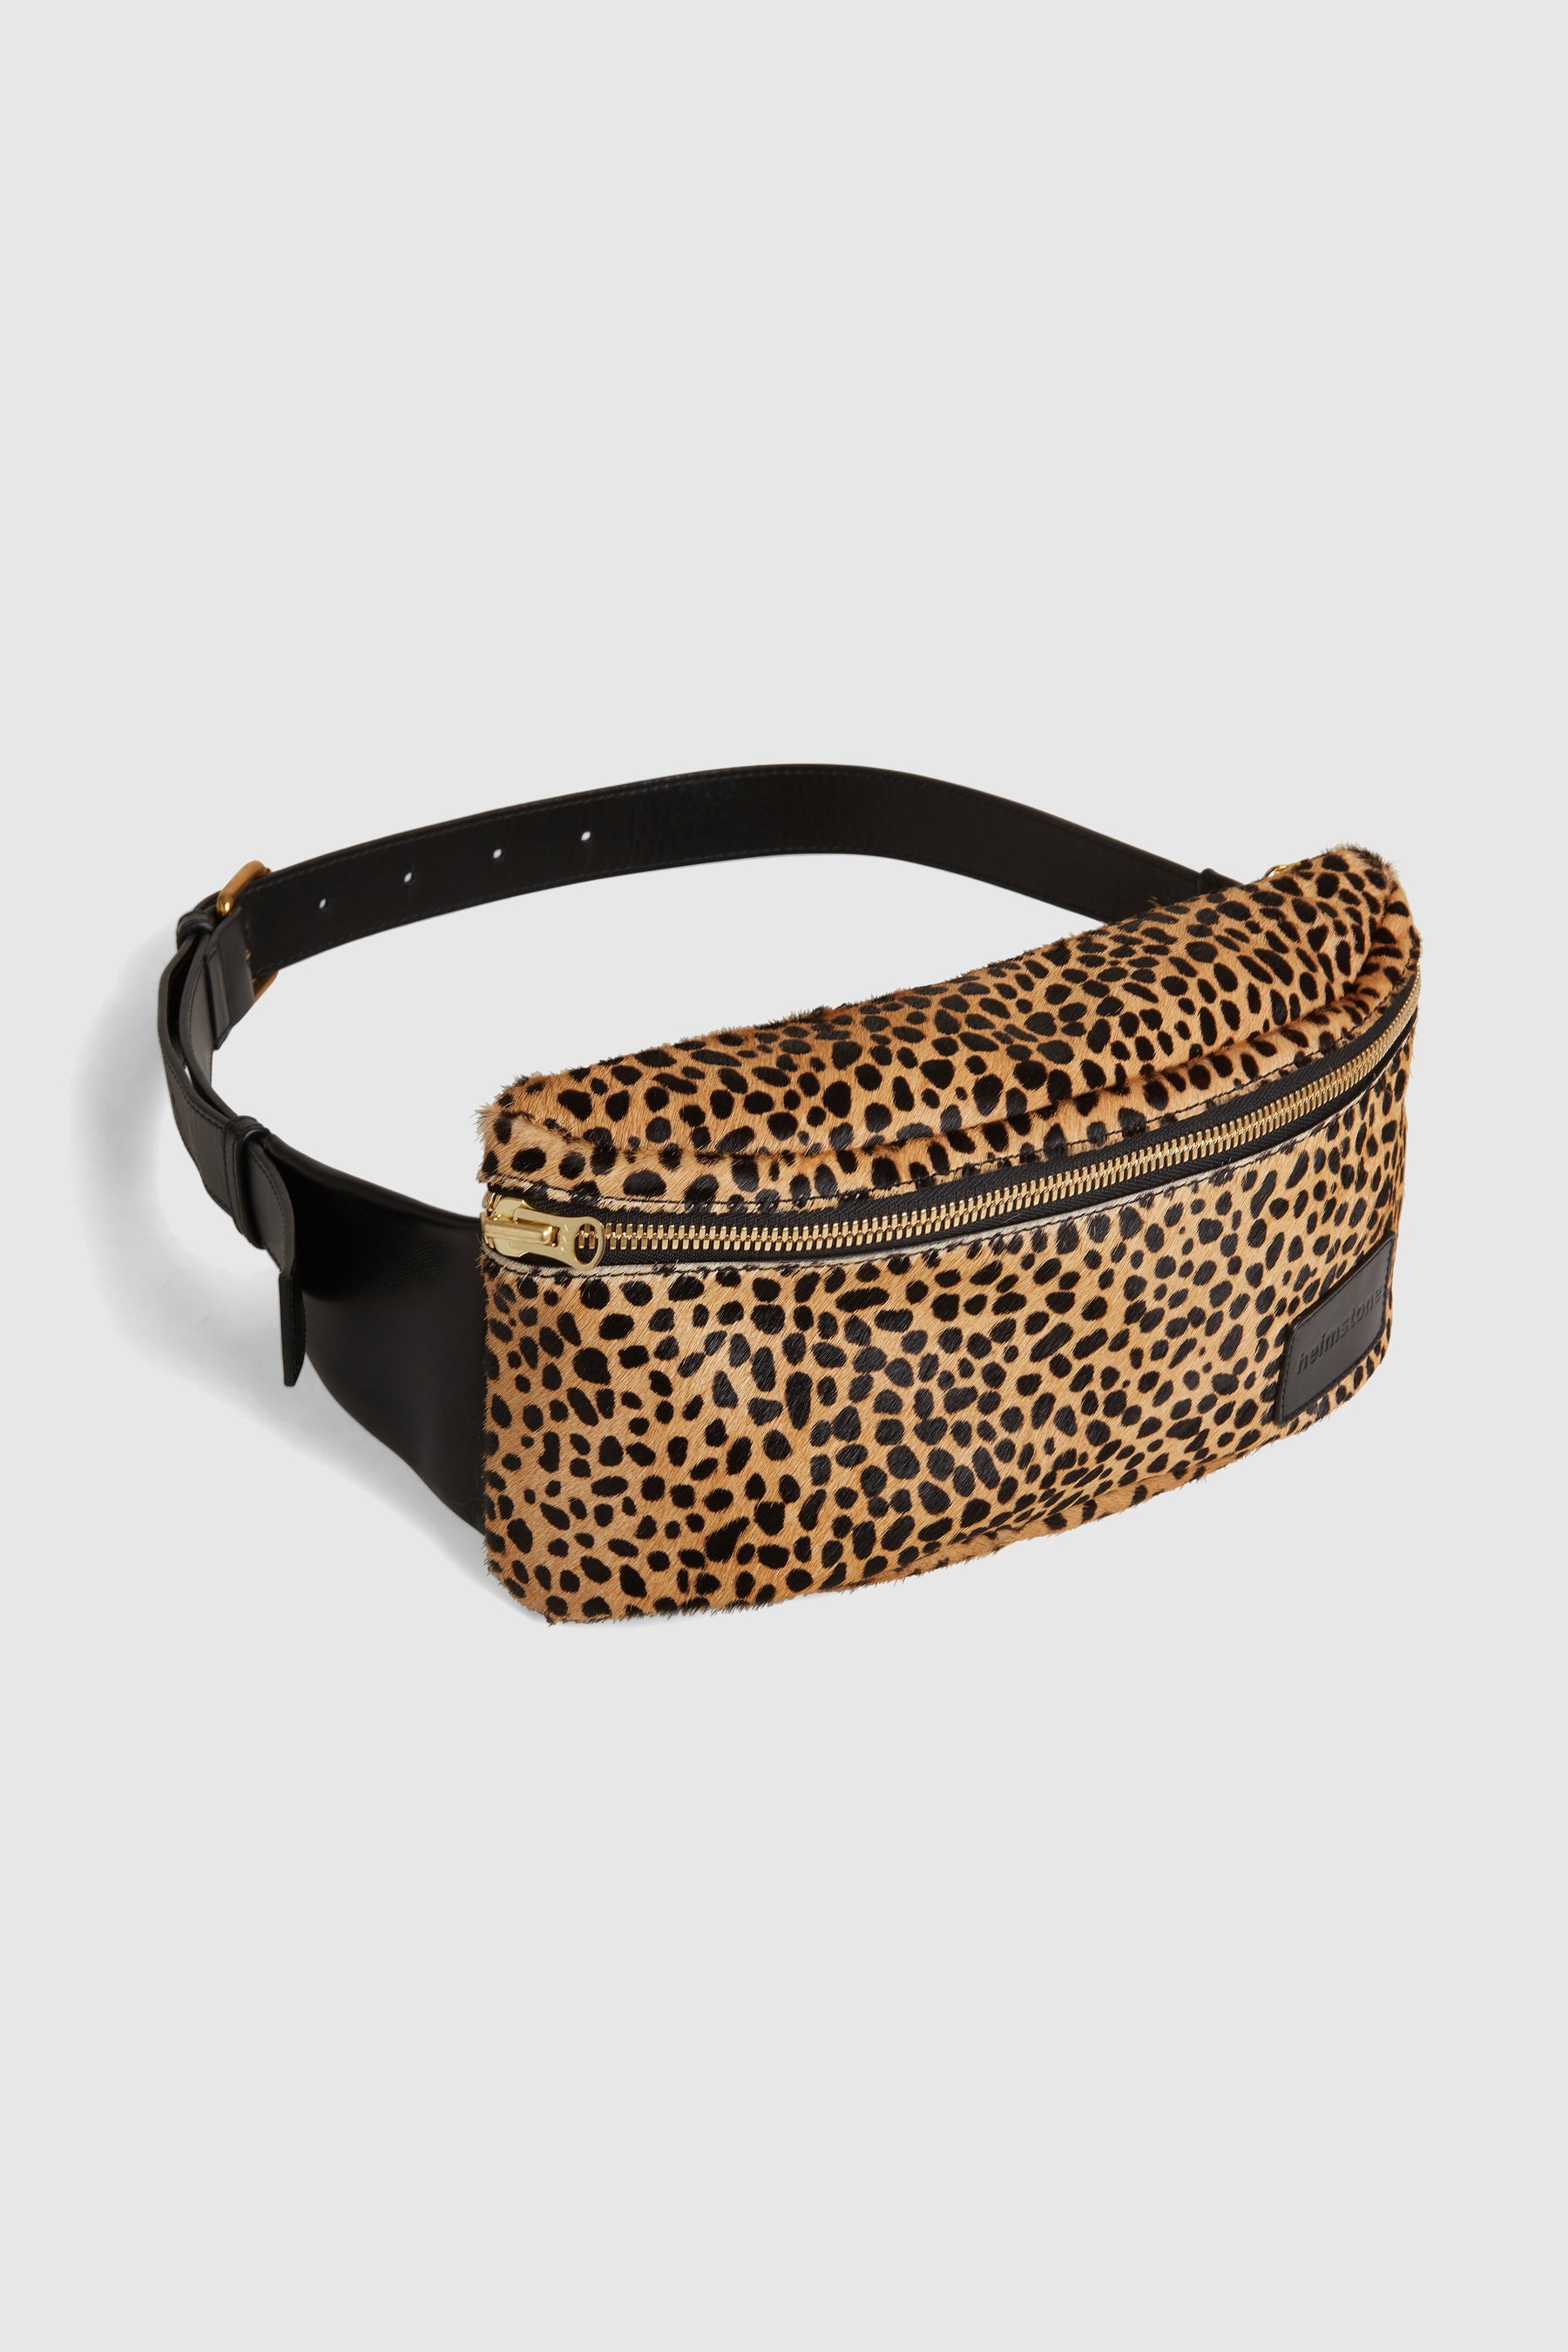 Fanny pack in cheetah printed leather